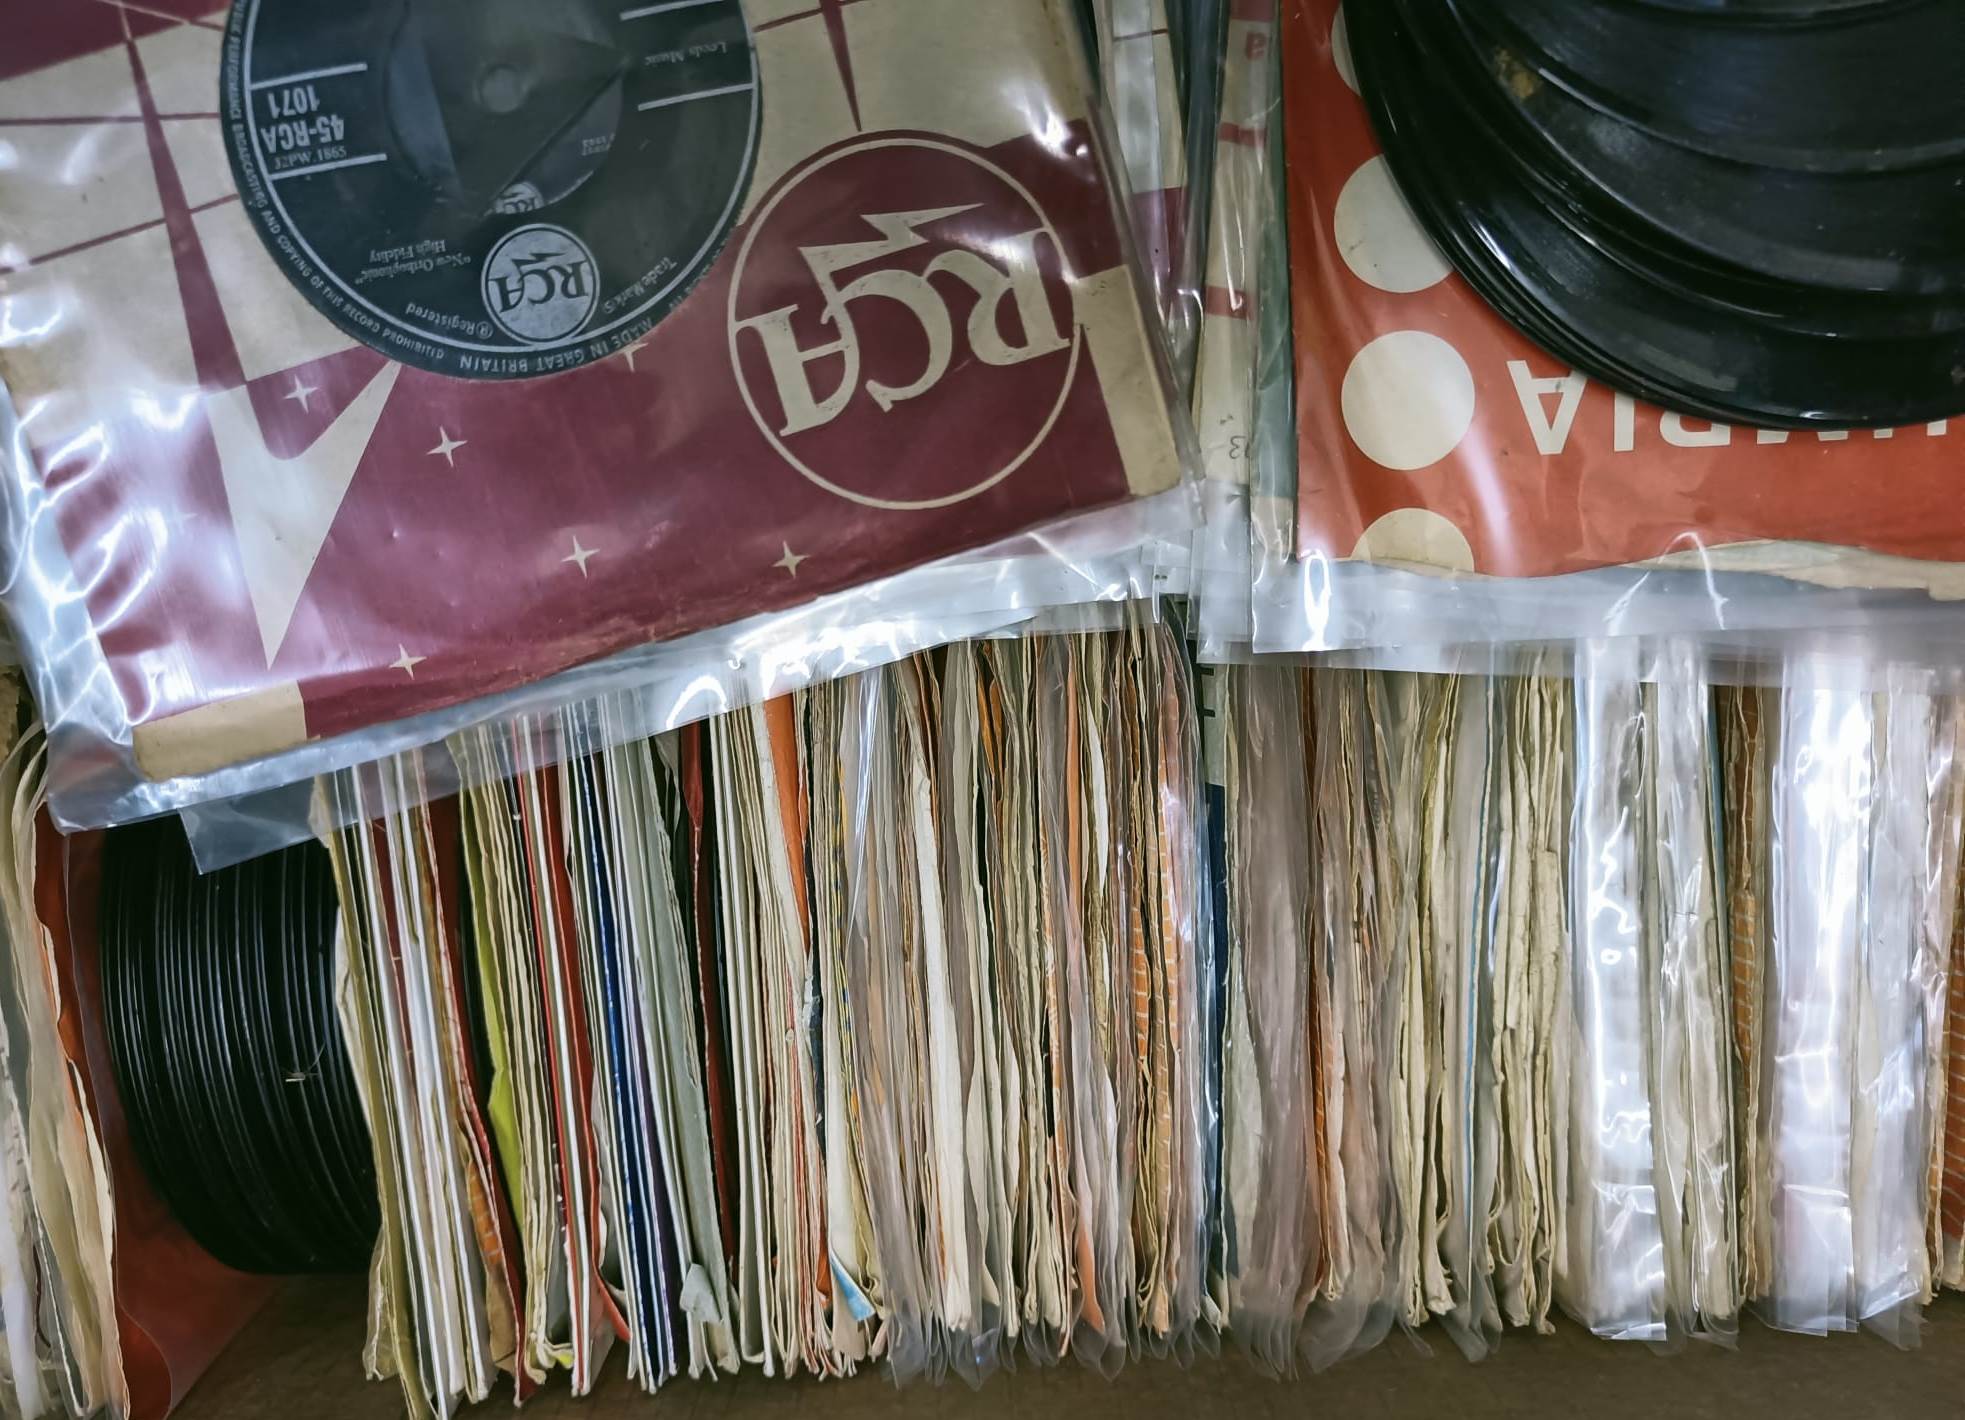 LARGE PRIVATE COLLECTION OF 45'S / SINGLES RECORDS 300+ - Image 3 of 3